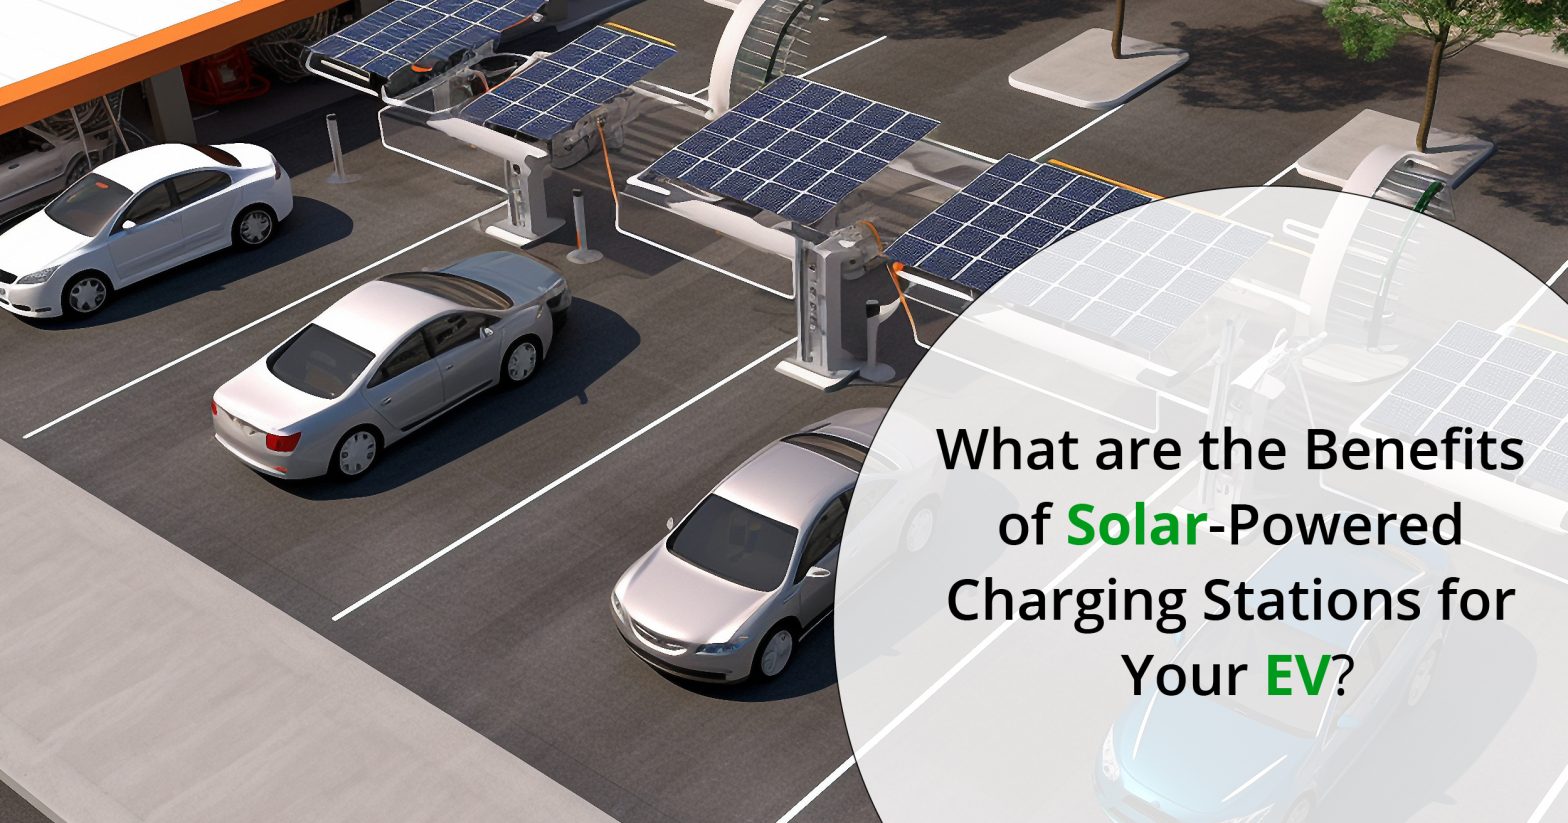 What are the Benefits of Solar-Powered Charging Stations for Your EV?